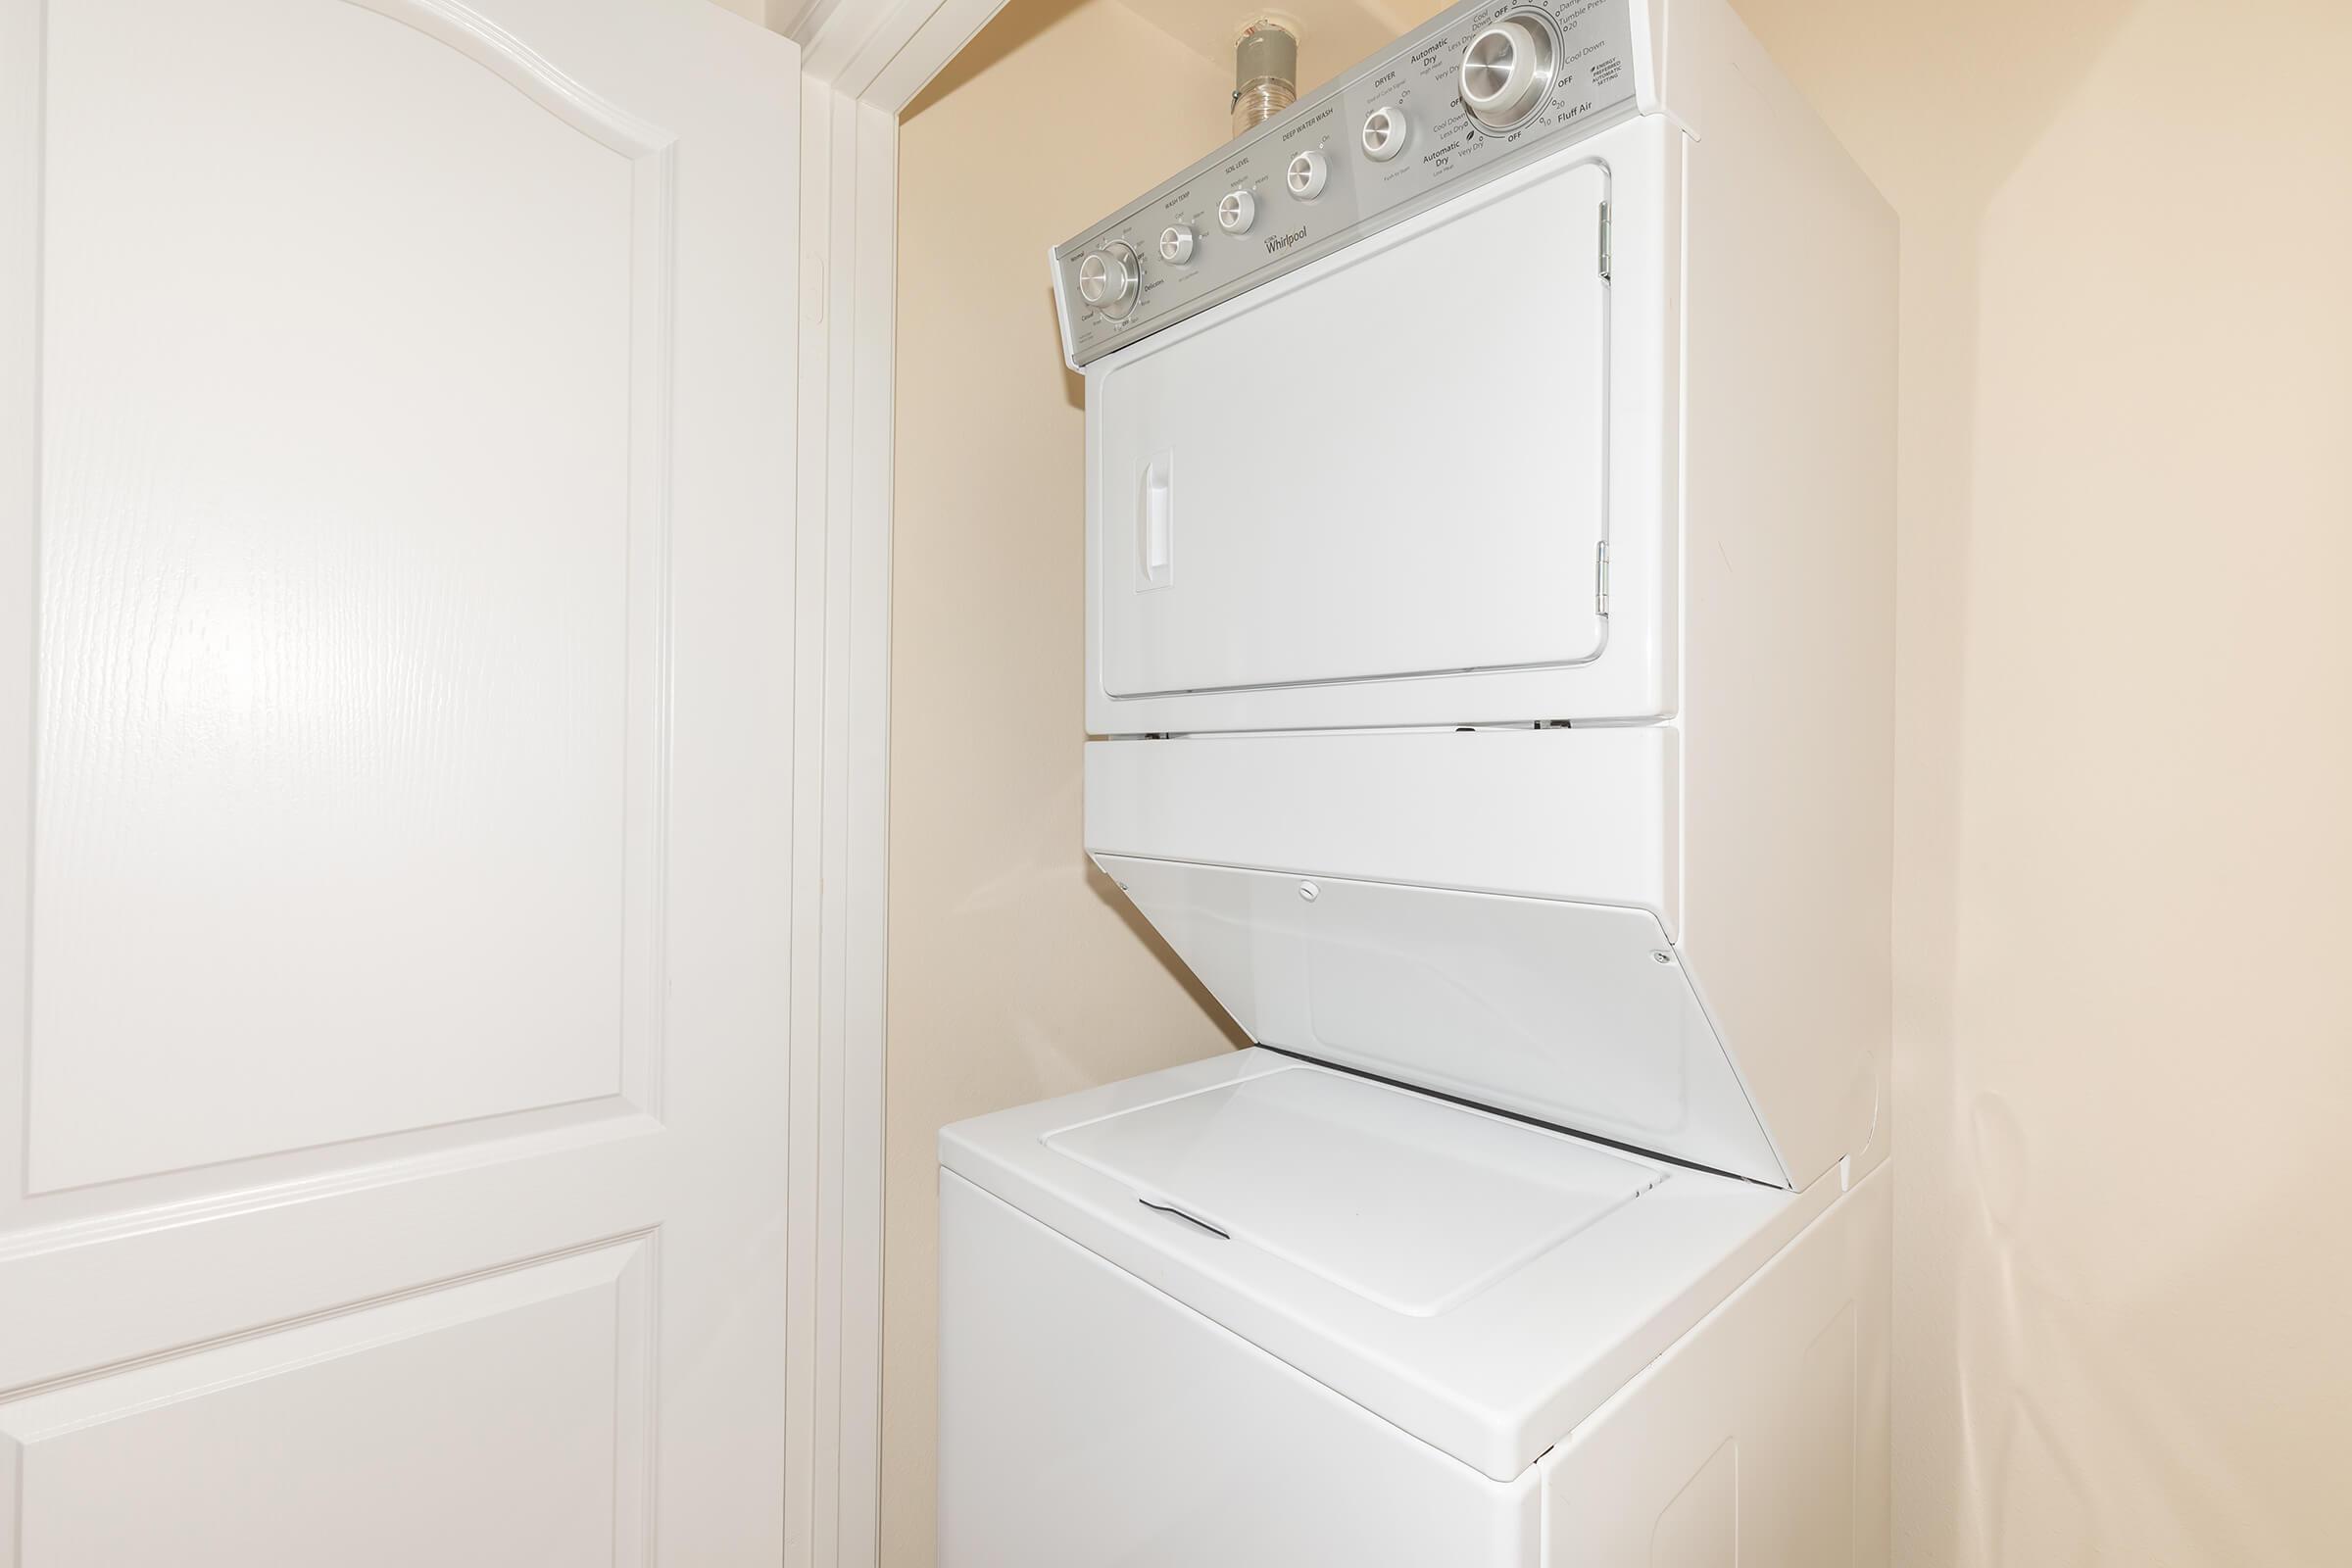 a white microwave oven sitting on top of a refrigerator